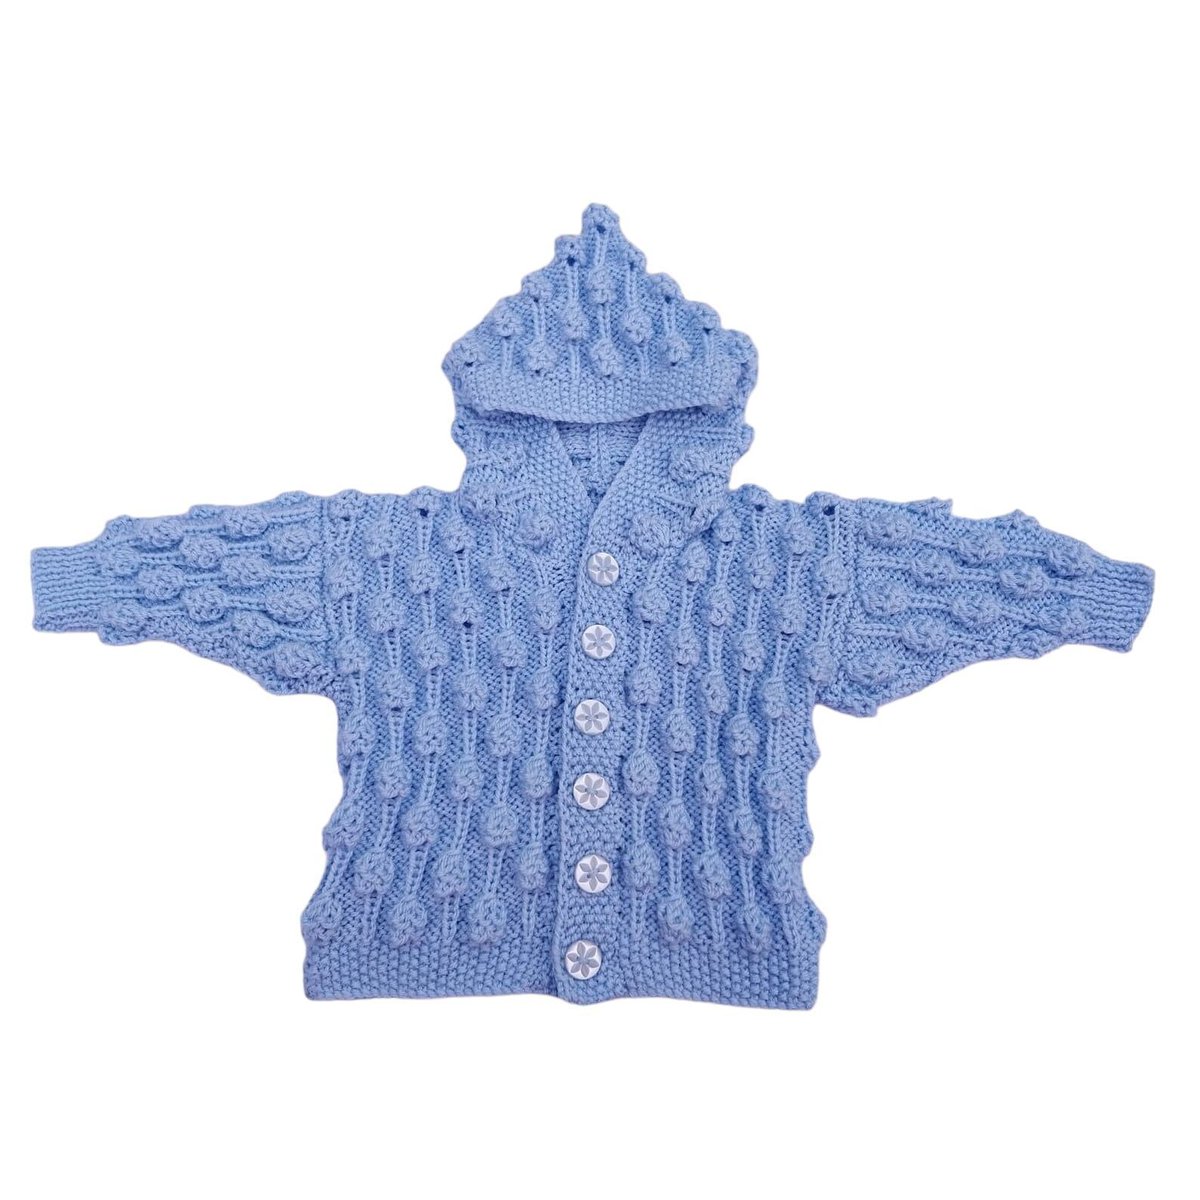 Baby cardigan with hood hand knitted in light blue yarn with an all over textured bobble pattern to fit 0 - 6 months knittingtopia.etsy.com/listing/150638… #knittingtopia #etsy #handmade #UKHashtags #knittedbabyclothes #babygifts #MHHSBD #craftbizparty #uksmallbiz